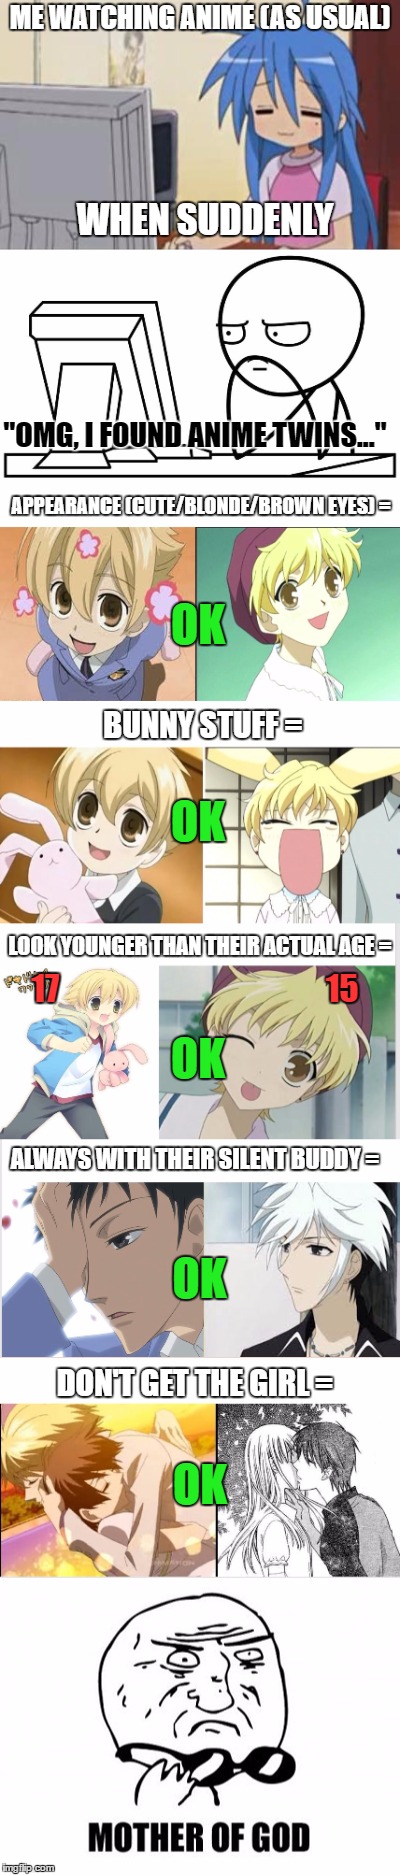 THEY ARE THE SAME PERSON!!!!!!! | ME WATCHING ANIME (AS USUAL); WHEN SUDDENLY; "OMG, I FOUND ANIME TWINS..."; APPEARANCE (CUTE/BLONDE/BROWN EYES) =; OK; OK; BUNNY STUFF =; LOOK YOUNGER THAN THEIR ACTUAL AGE =; 17                                          15; OK; ALWAYS WITH THEIR SILENT BUDDY =; OK; DON'T GET THE GIRL =; OK | image tagged in anime,momiji,honey-senpai,fruit basket,ouran highschool host club | made w/ Imgflip meme maker